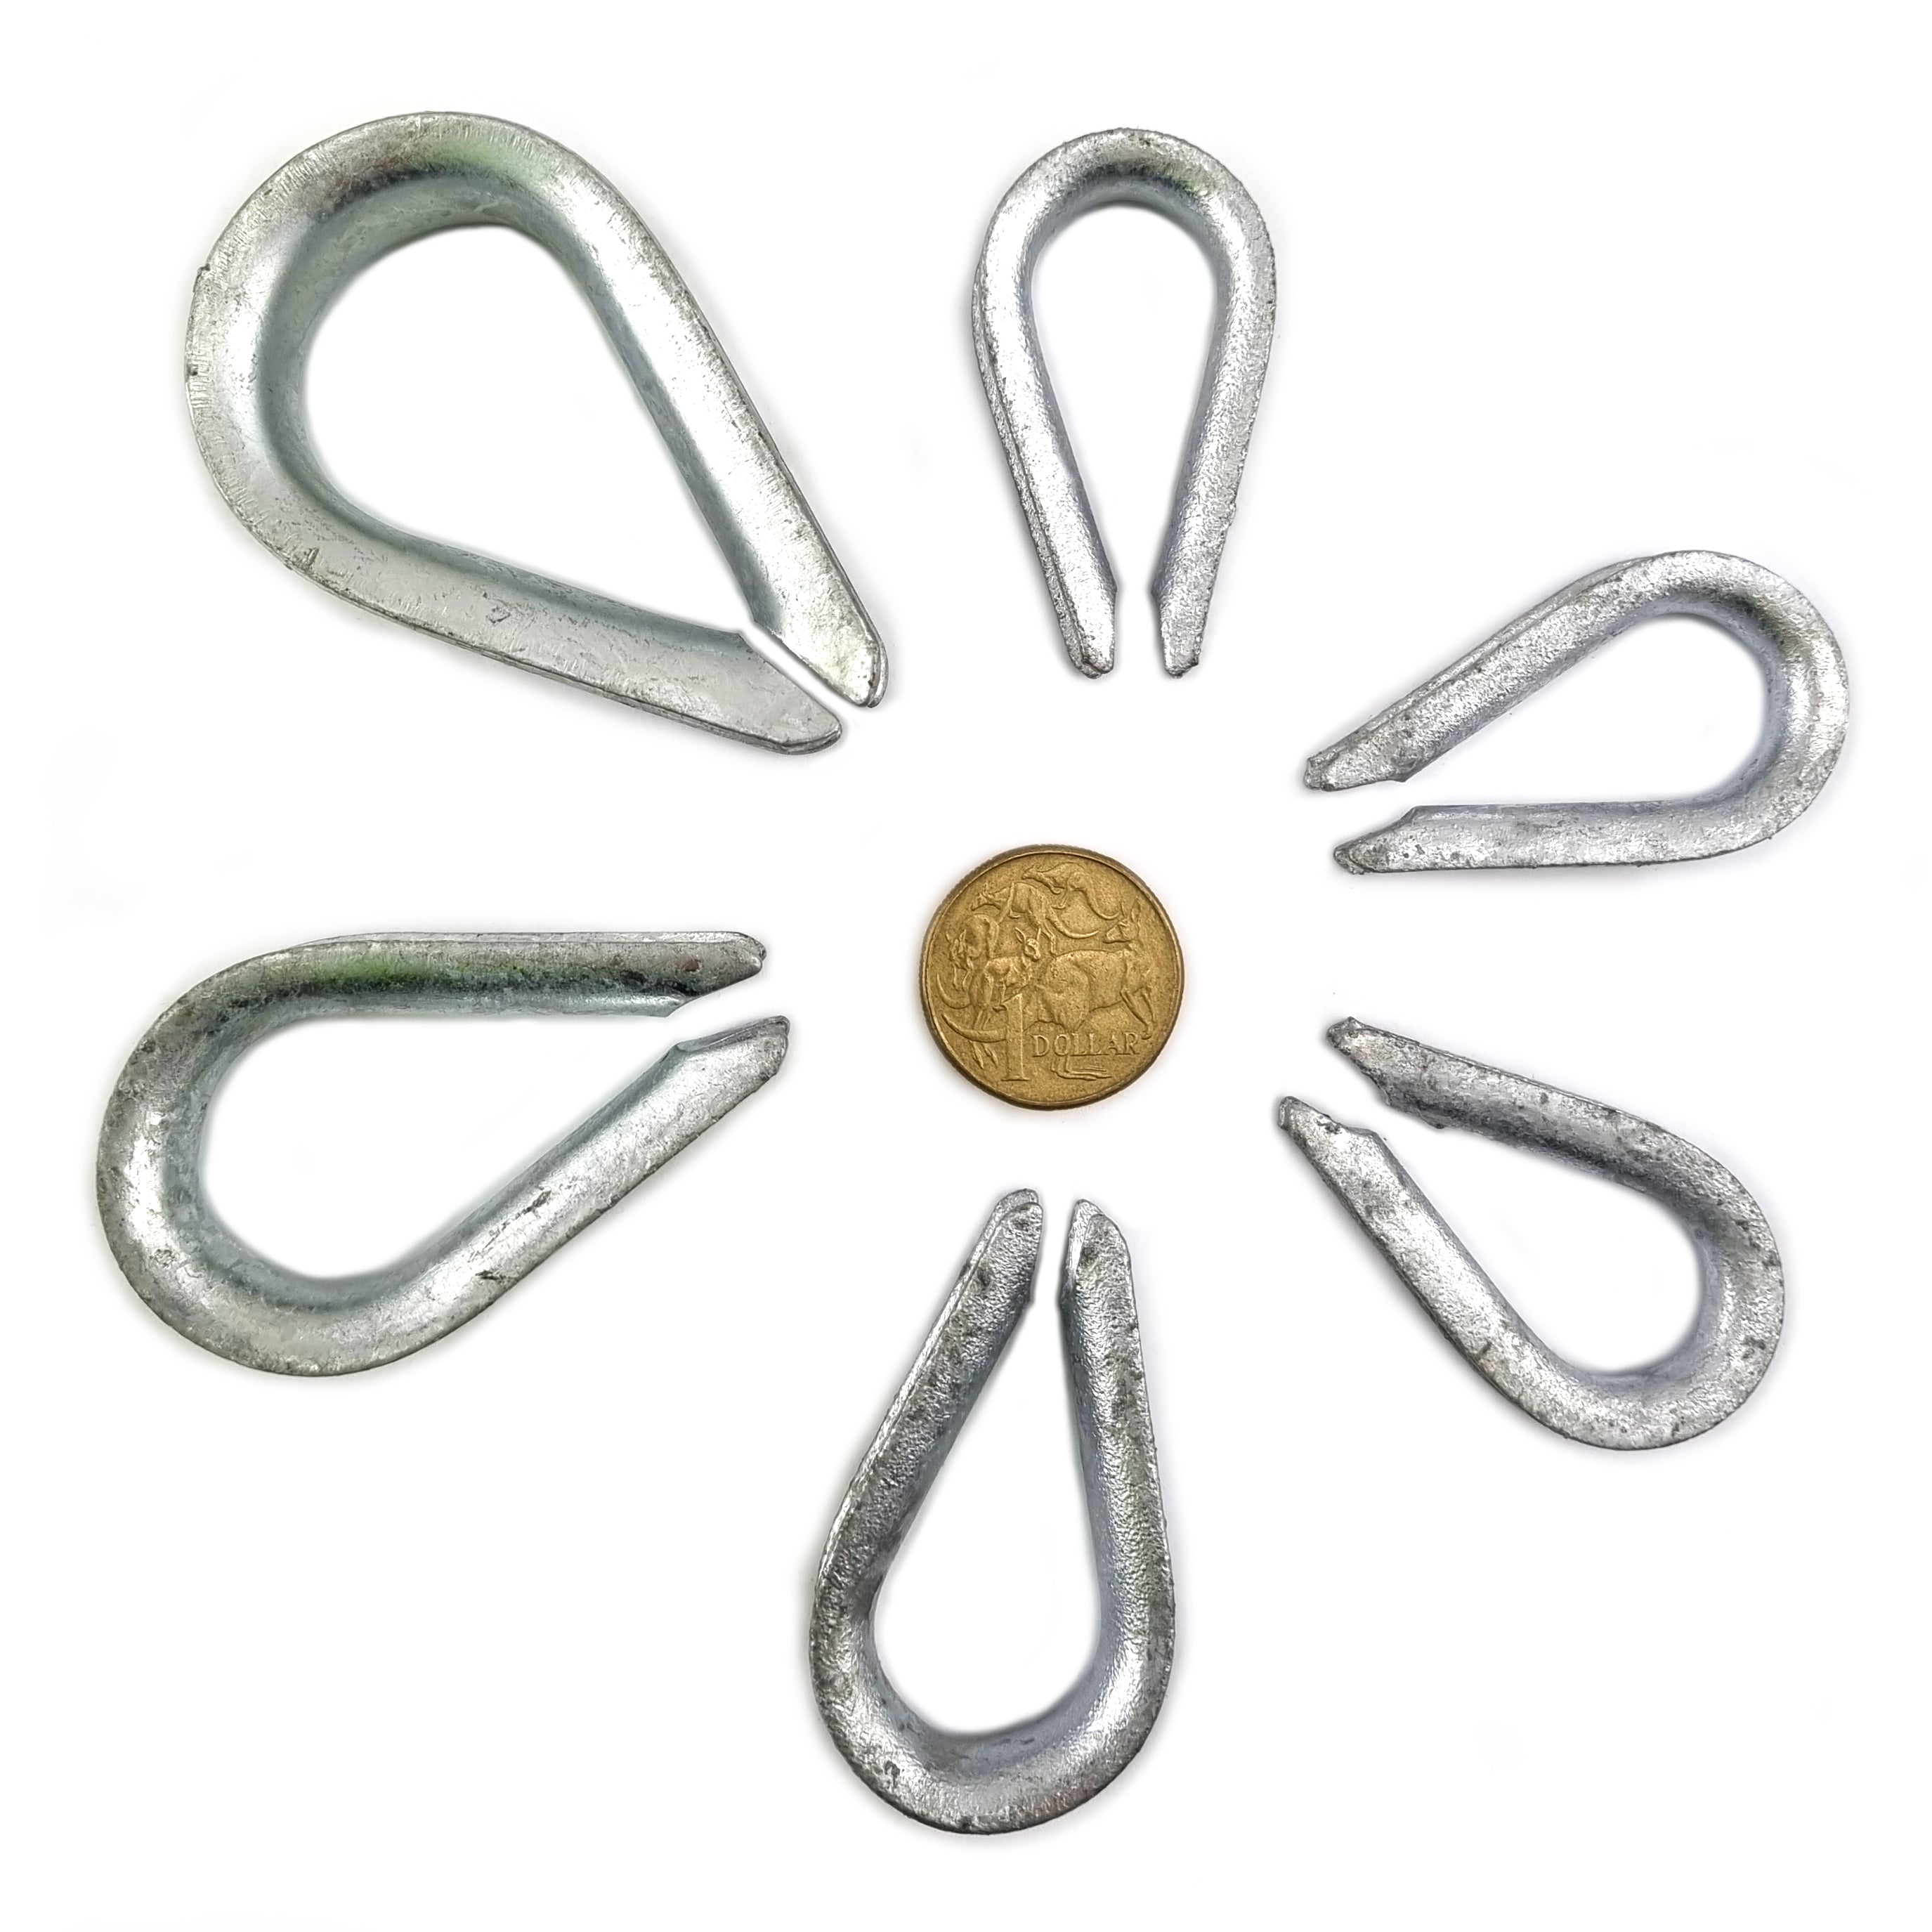 Galvanised thimbles are available in sizes: 3mm, 4mm, 5mm, 6mm, 8mm, 10mm and 12mm. Shop online chain.com.au